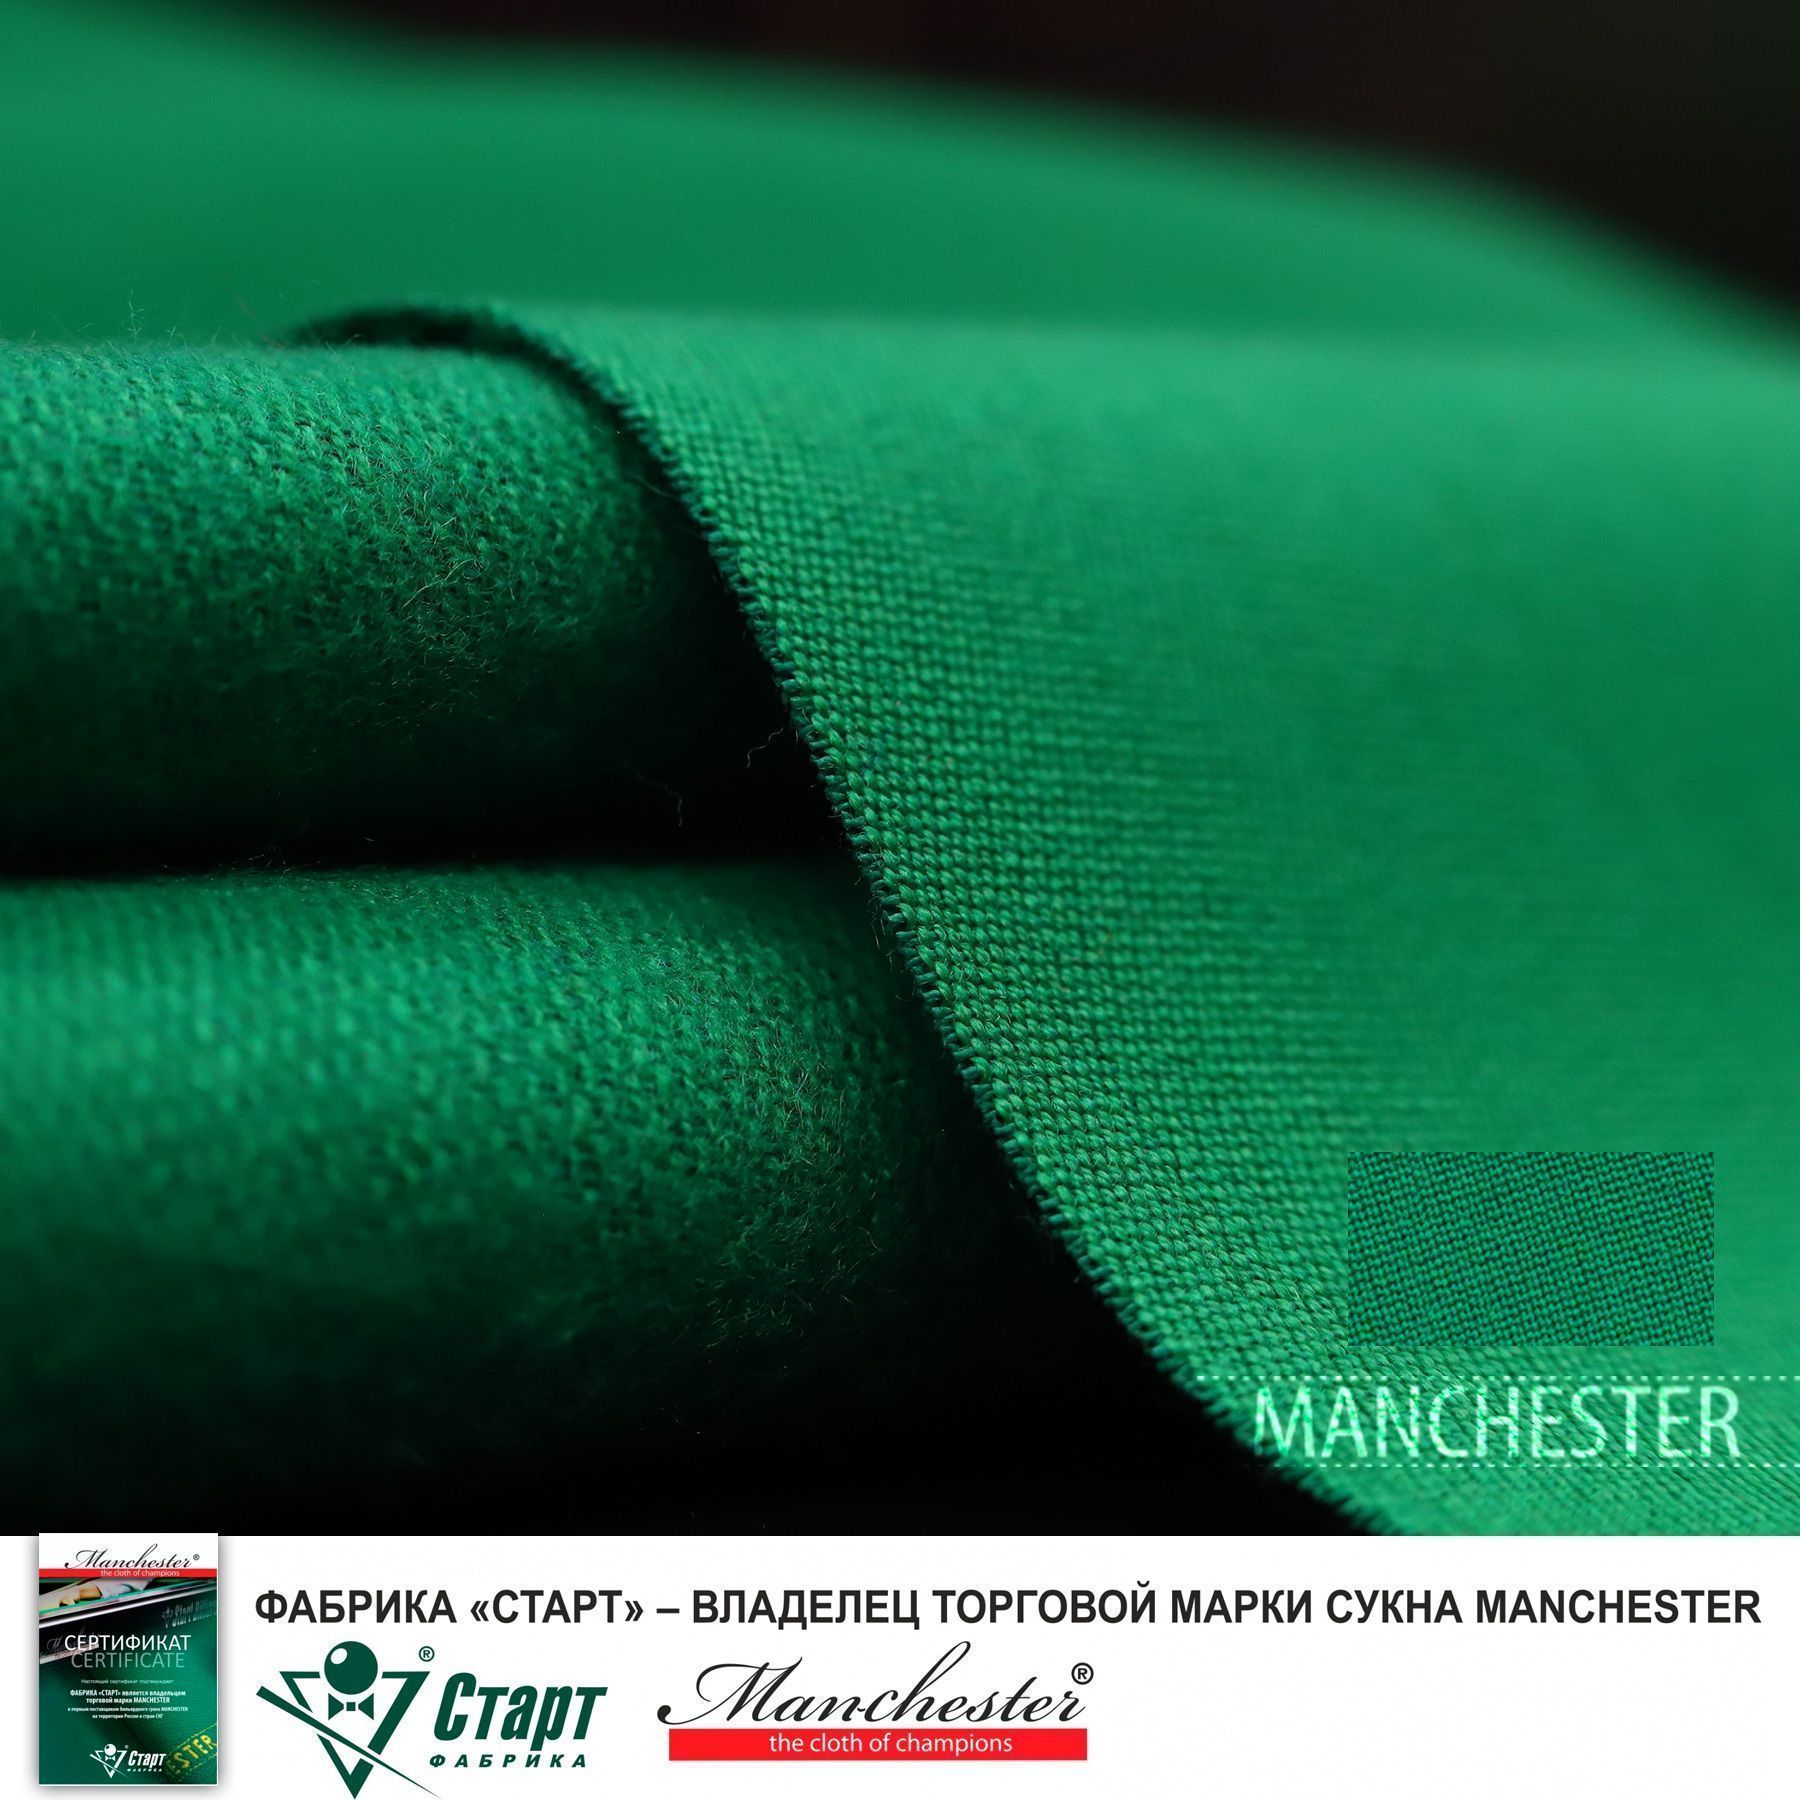 Сукно Manchester 70 Yellow green competition ш2.0м